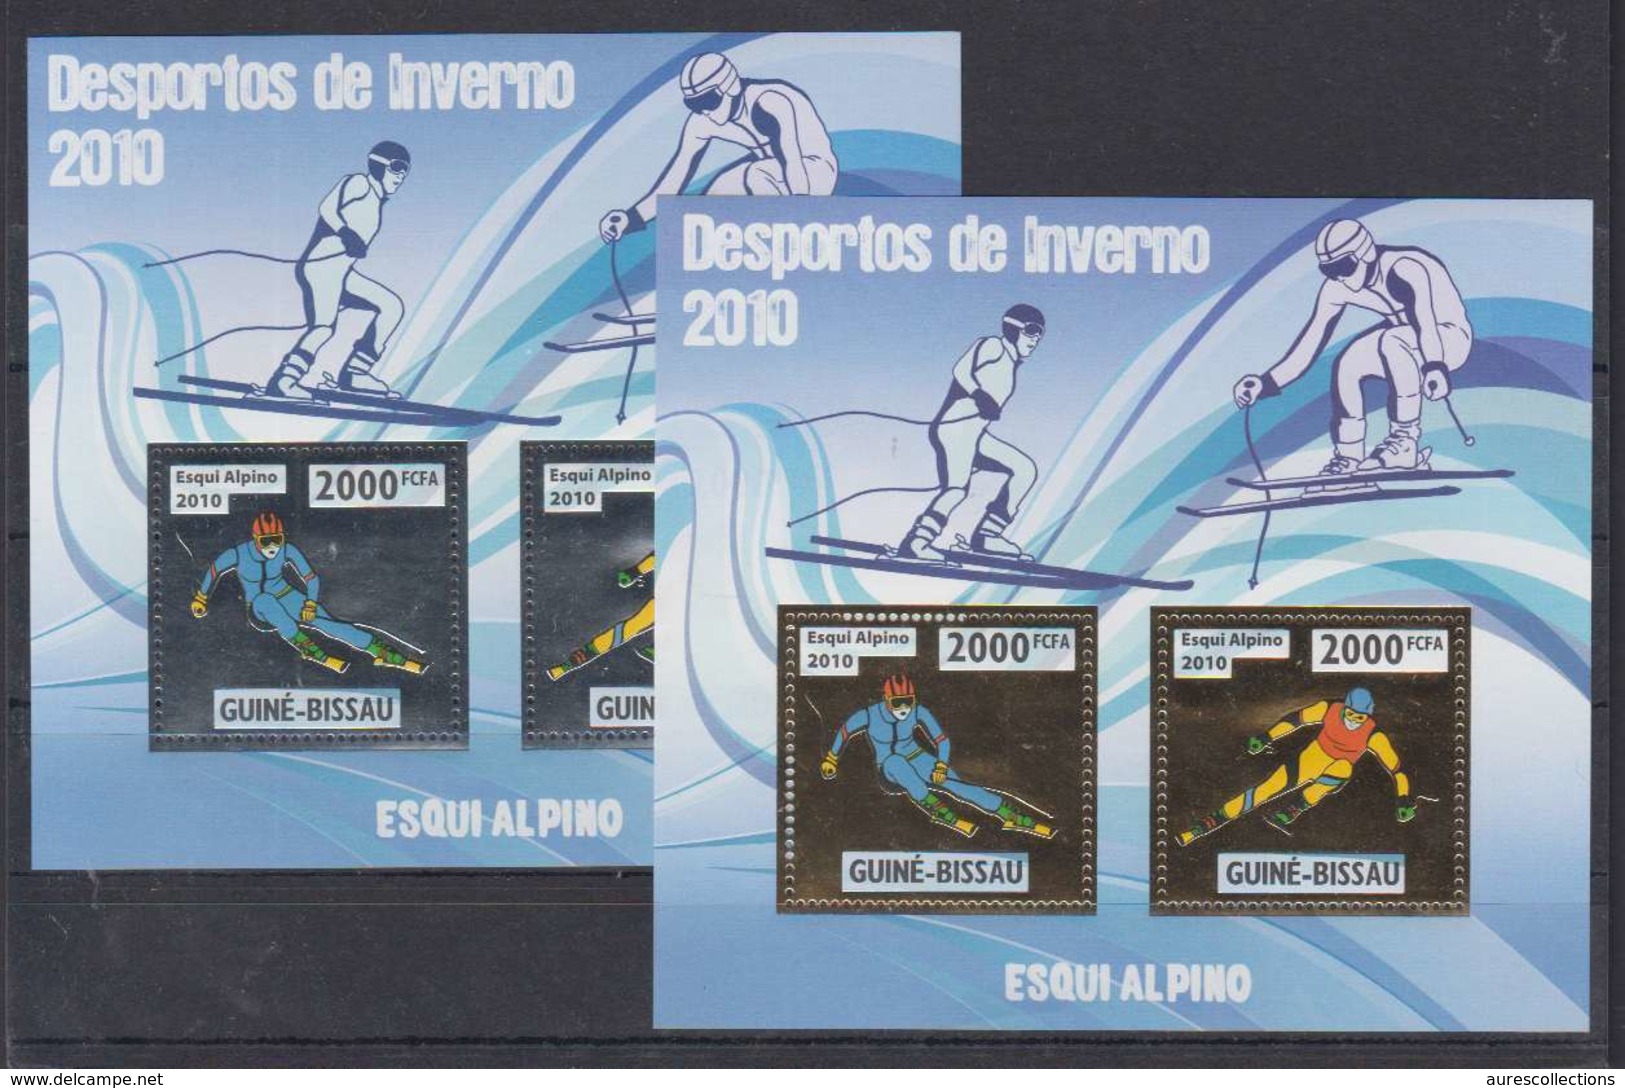 GUINEE BISSAU GUINE 2010 - WINTER OLYMPIC SPORT GAMES VANCOUVER -  SKI ALPIN ALPINE SKIING - GOLD + SILVER - RARE MNH - Invierno 2010: Vancouver